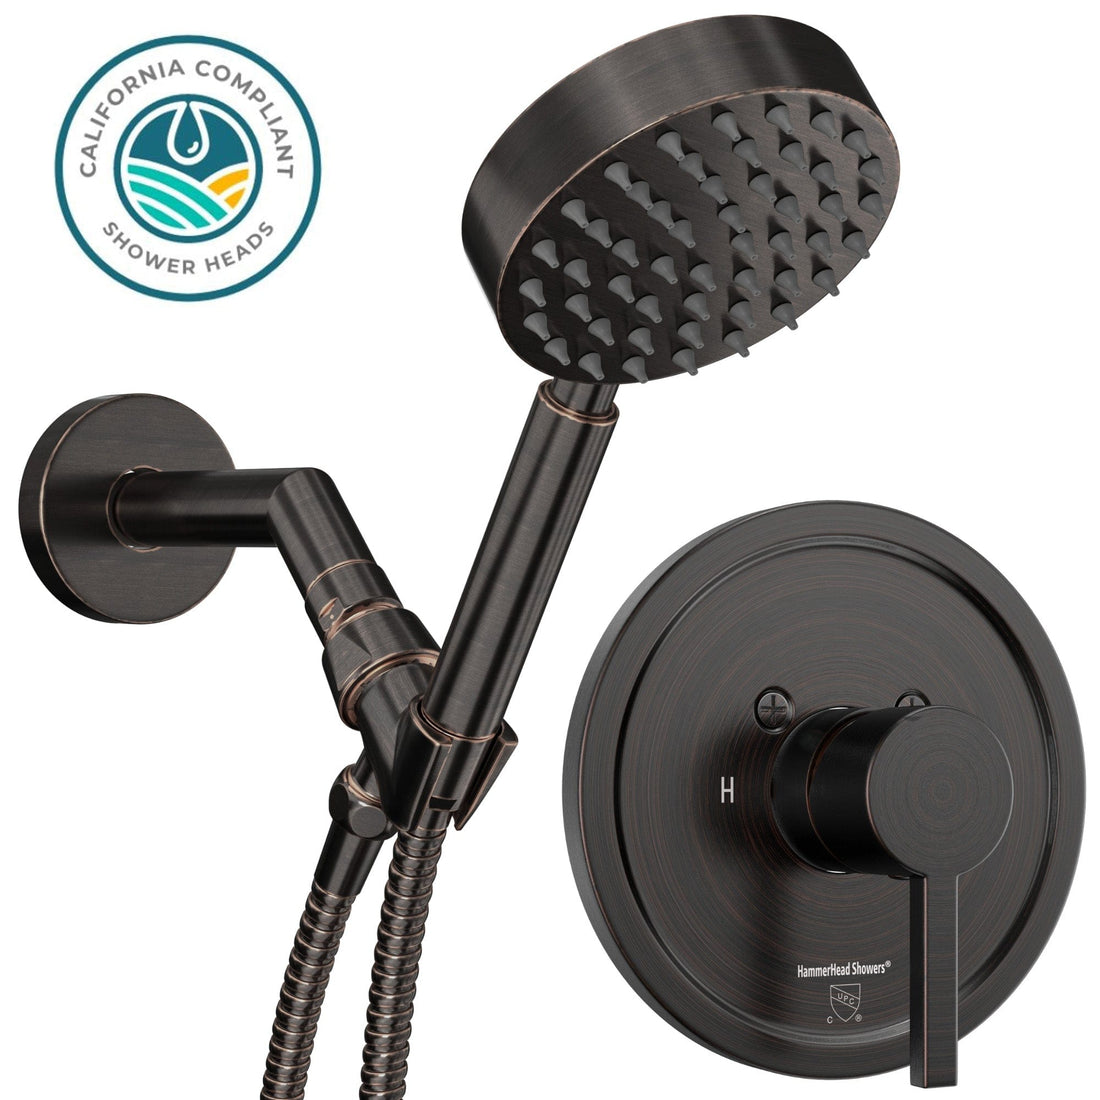 Main Image Valve and Trim, Low Flow 1-Spray Handheld and 7" Shower Arm Oil Rubbed Bronze  / 1.75 - The Shower Head Store